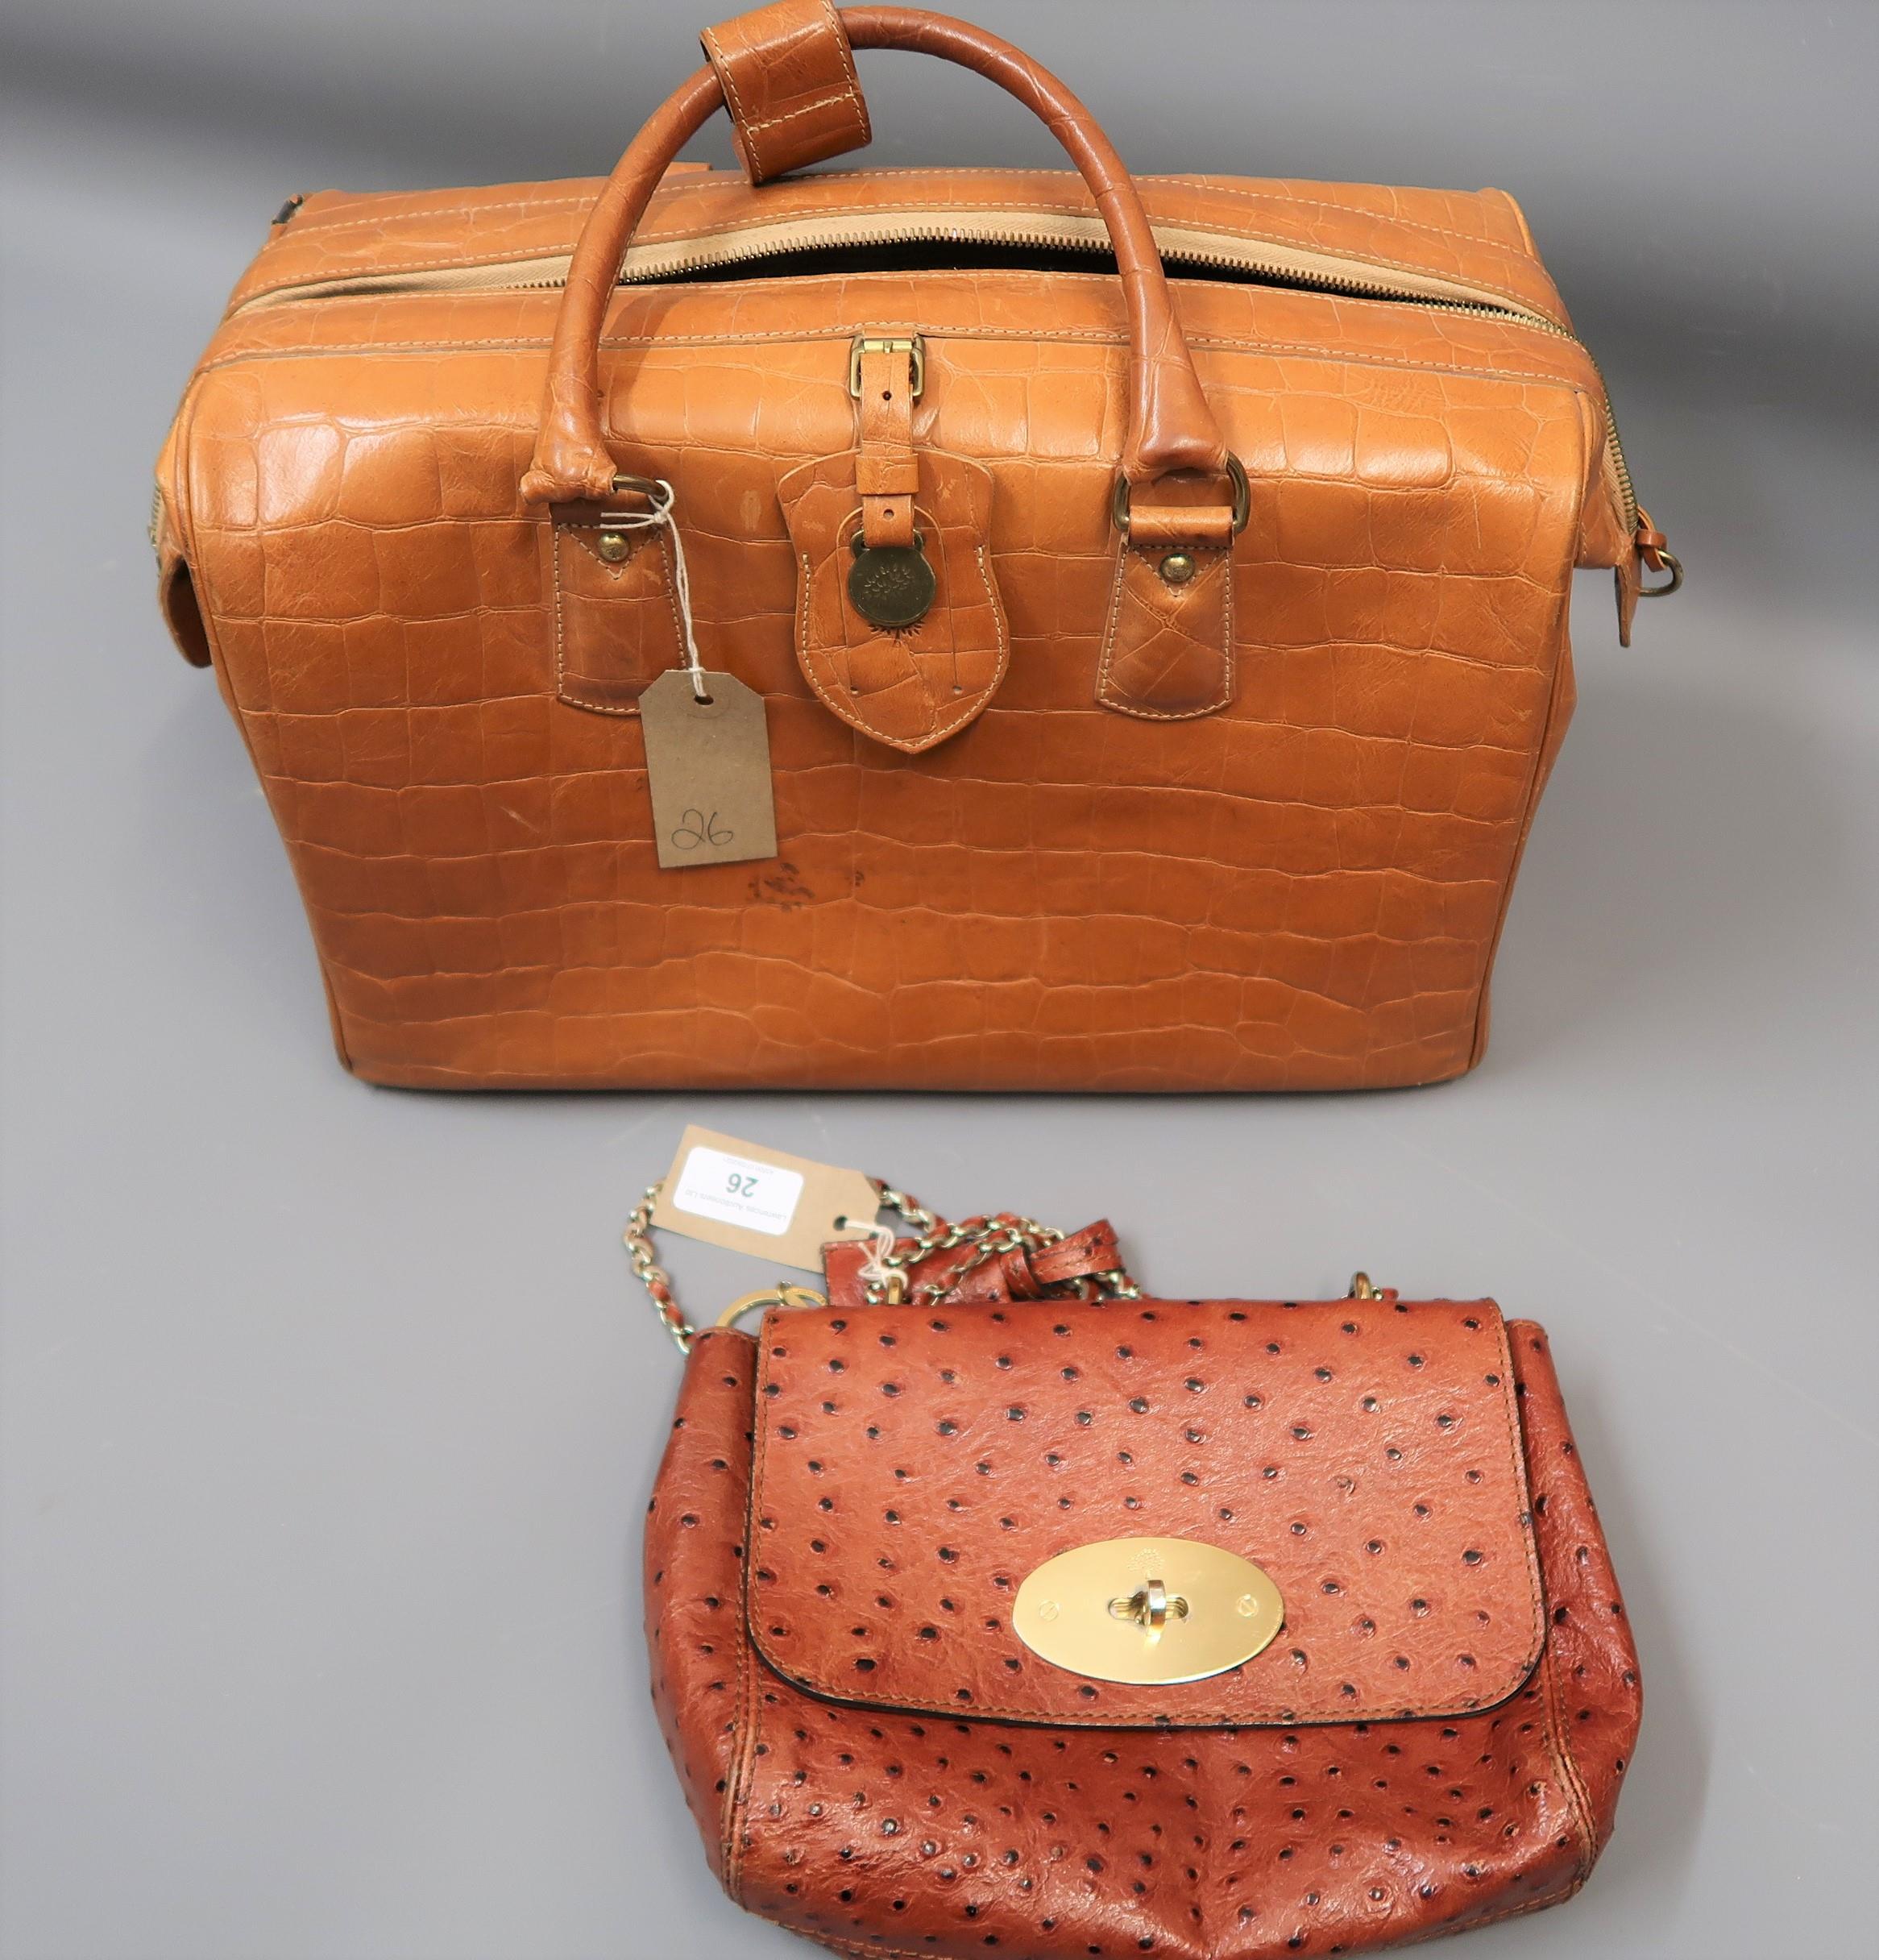 Mulberry ostrich handbag together with a Mulberry brown leather holdall type bag (worn)